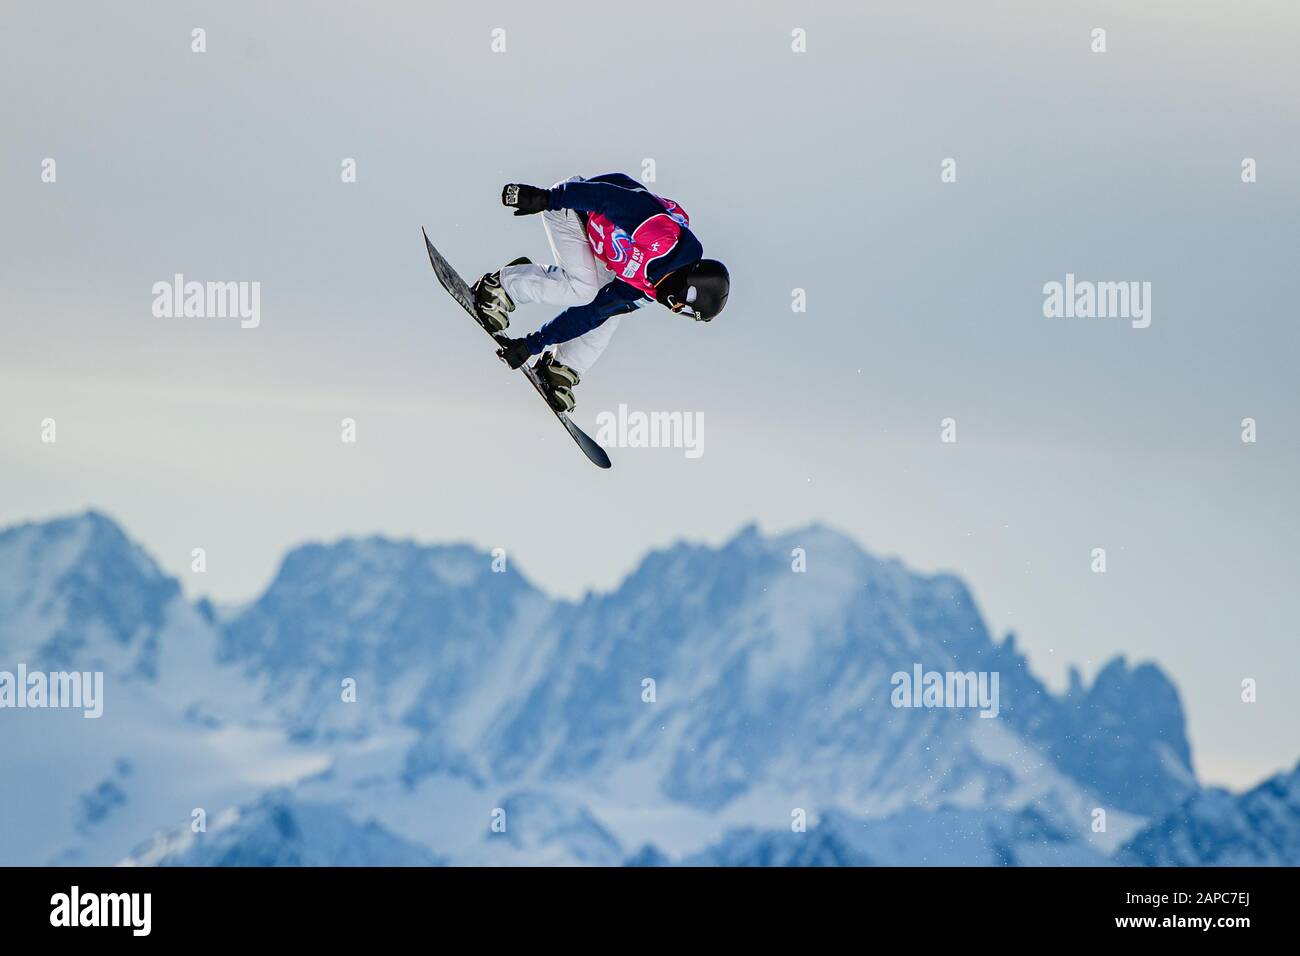 LAUSANNE, SWITZERLAND. 22th, Jan 2020. MORENO Valentin (ARG) competes in the Snowboard: Men's Big Air competitions during the Lausanne 2020 Youth Olympic Games at Leysin Park & Pipe on Wednesday, 22 January 2020. LAUSANNE, SWITZERLAND. Credit: Taka G Wu/Alamy Live News Stock Photo